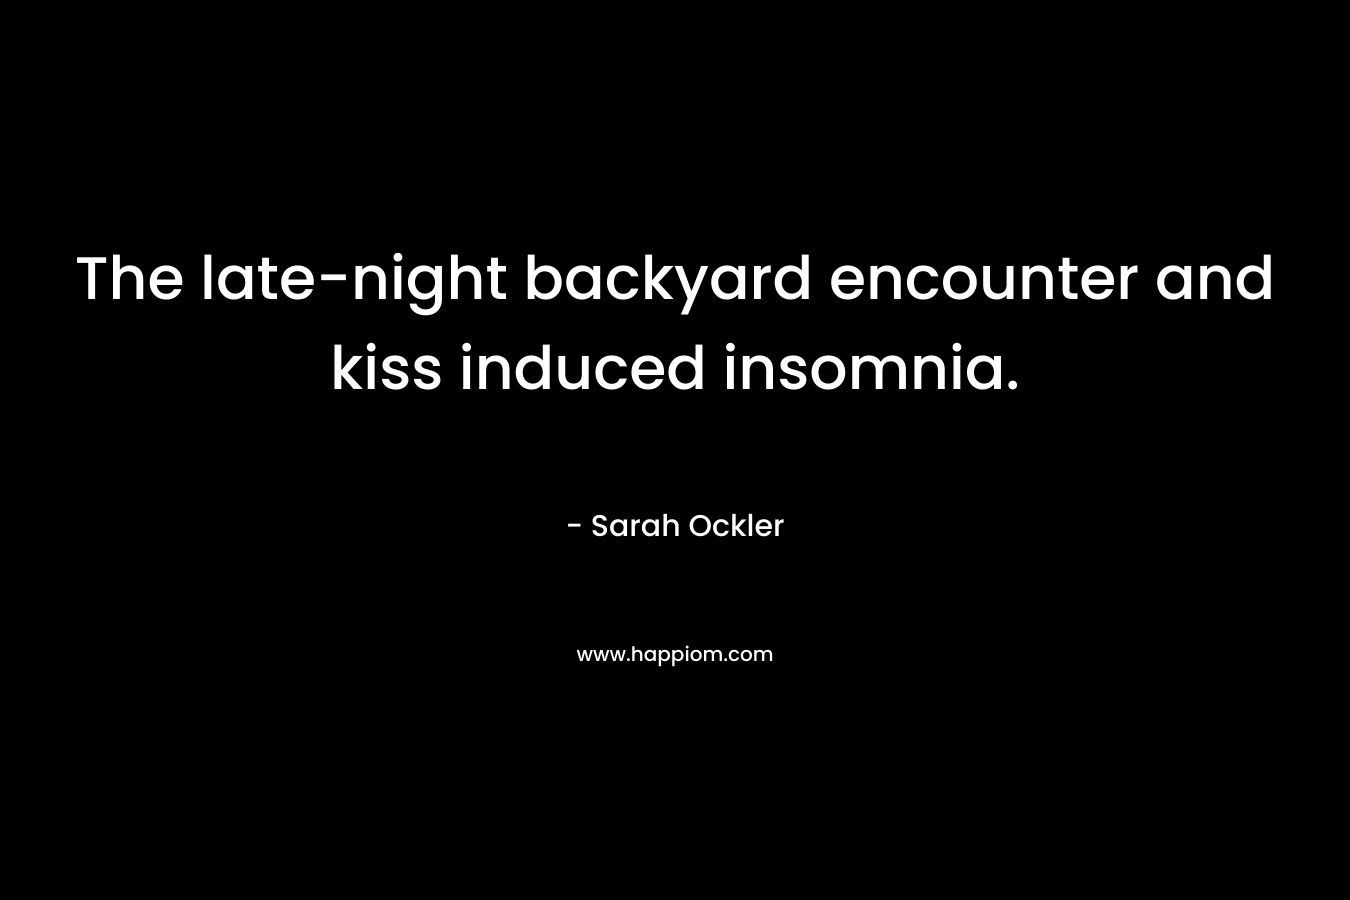 The late-night backyard encounter and kiss induced insomnia. – Sarah Ockler